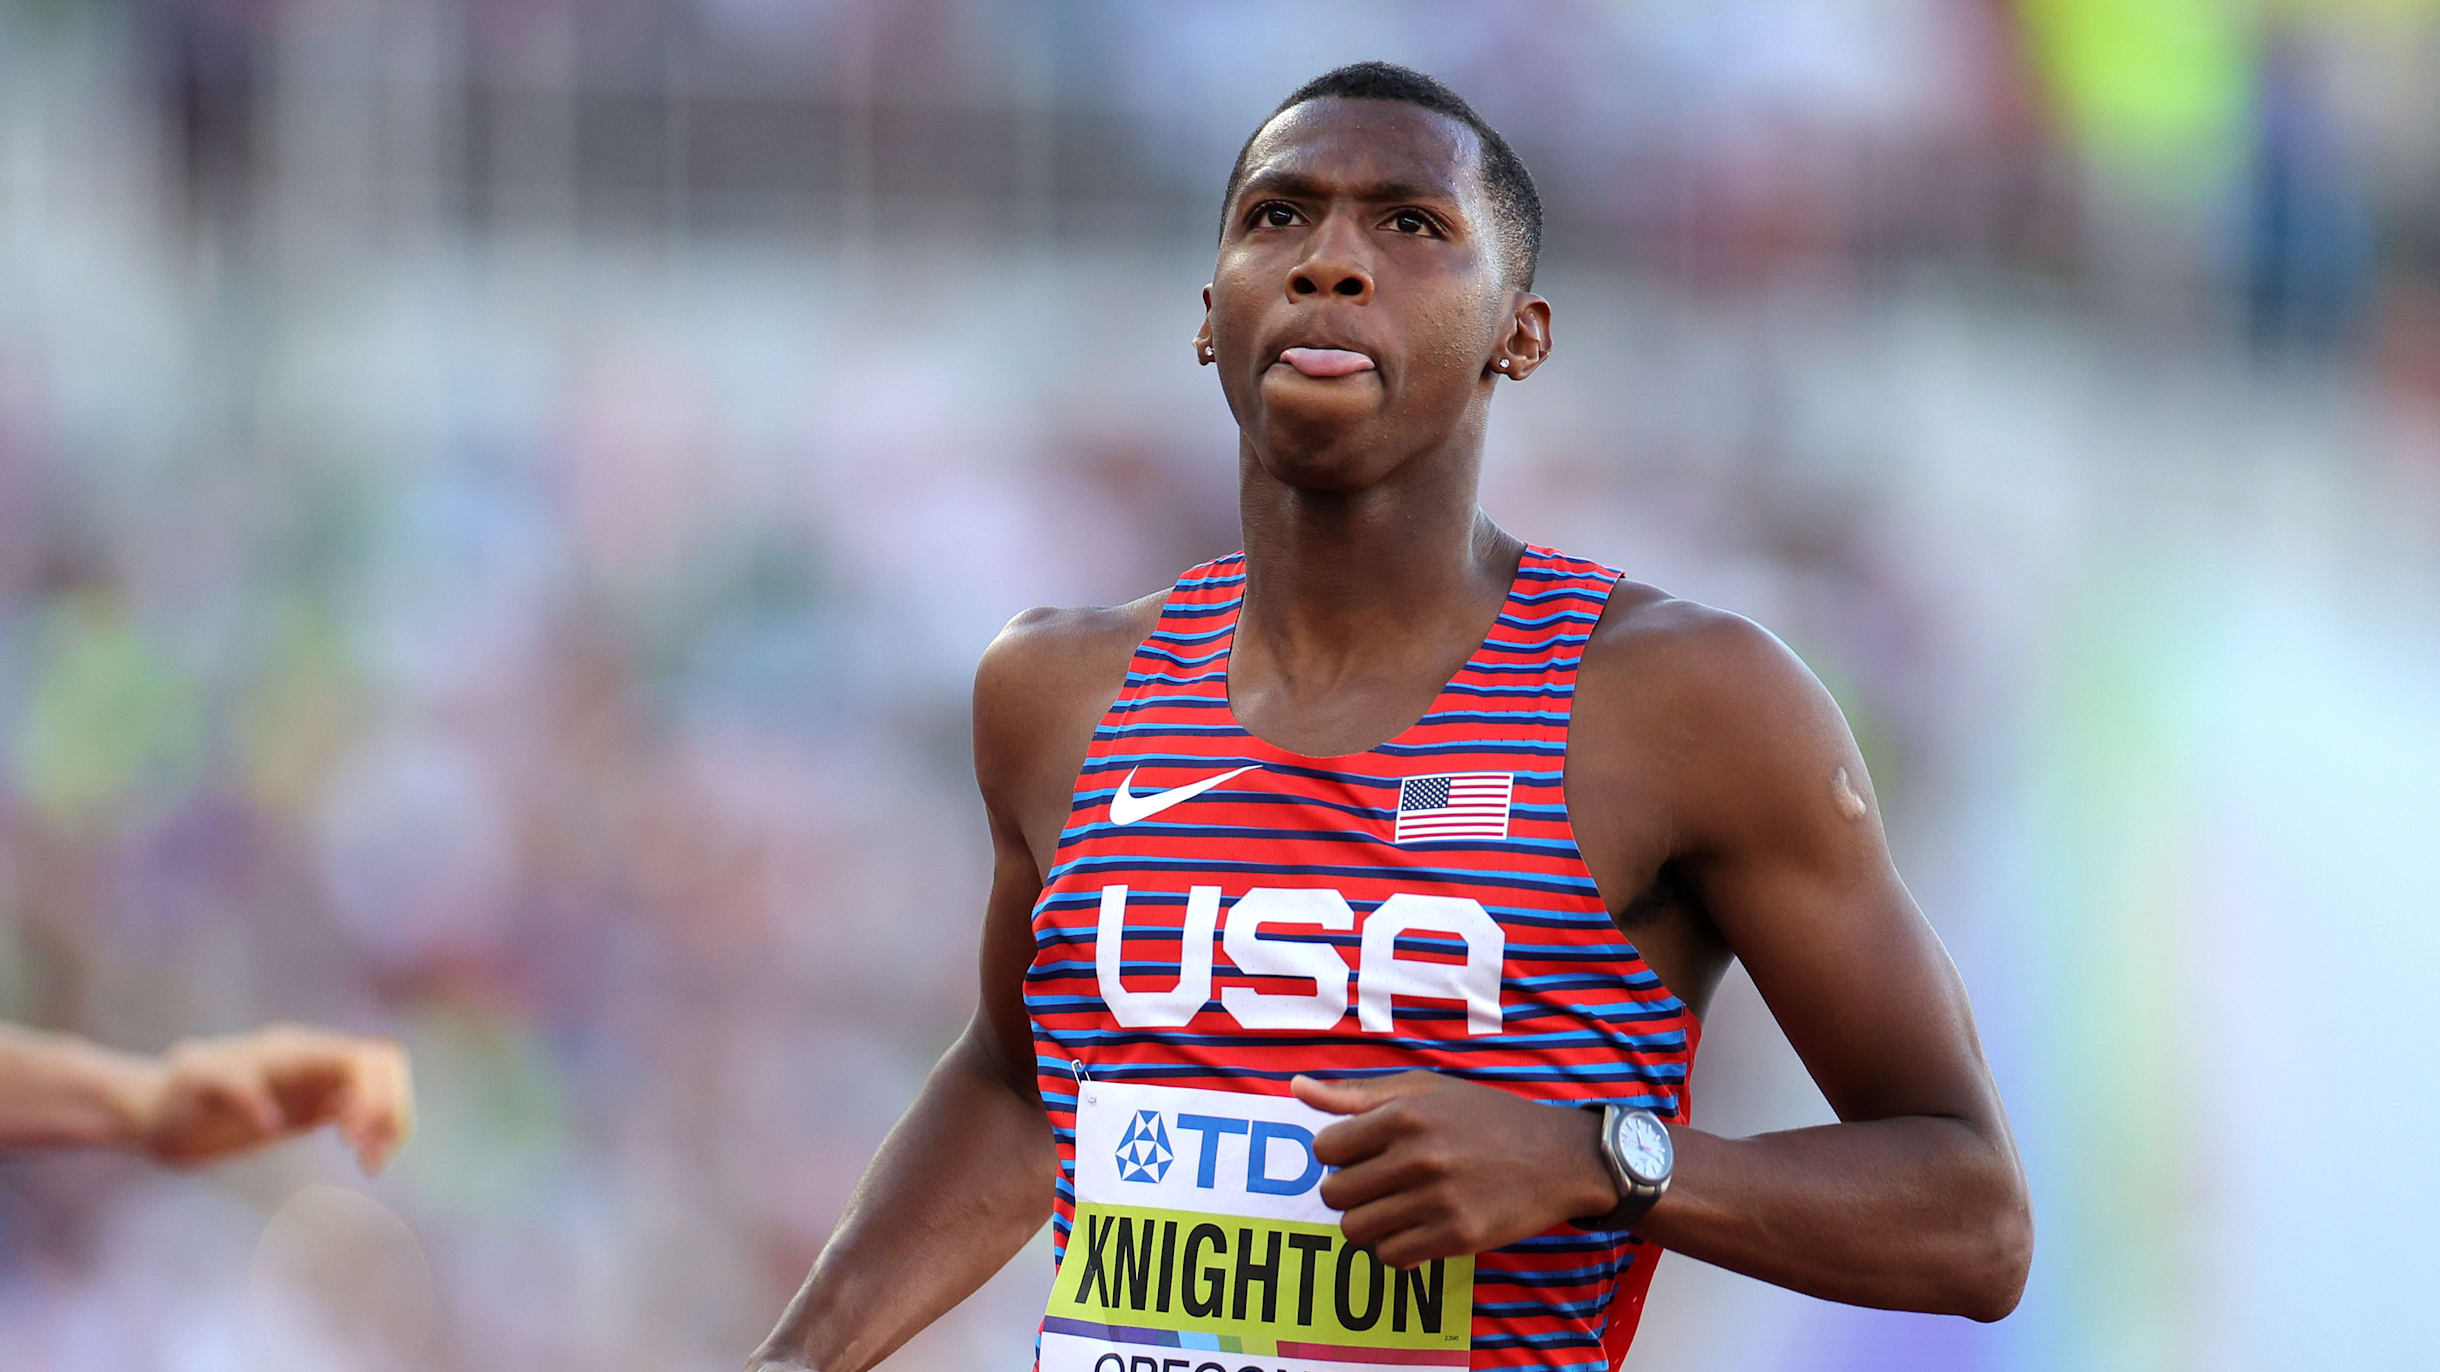 World track and field championships 2022: Knighton and Lyles set